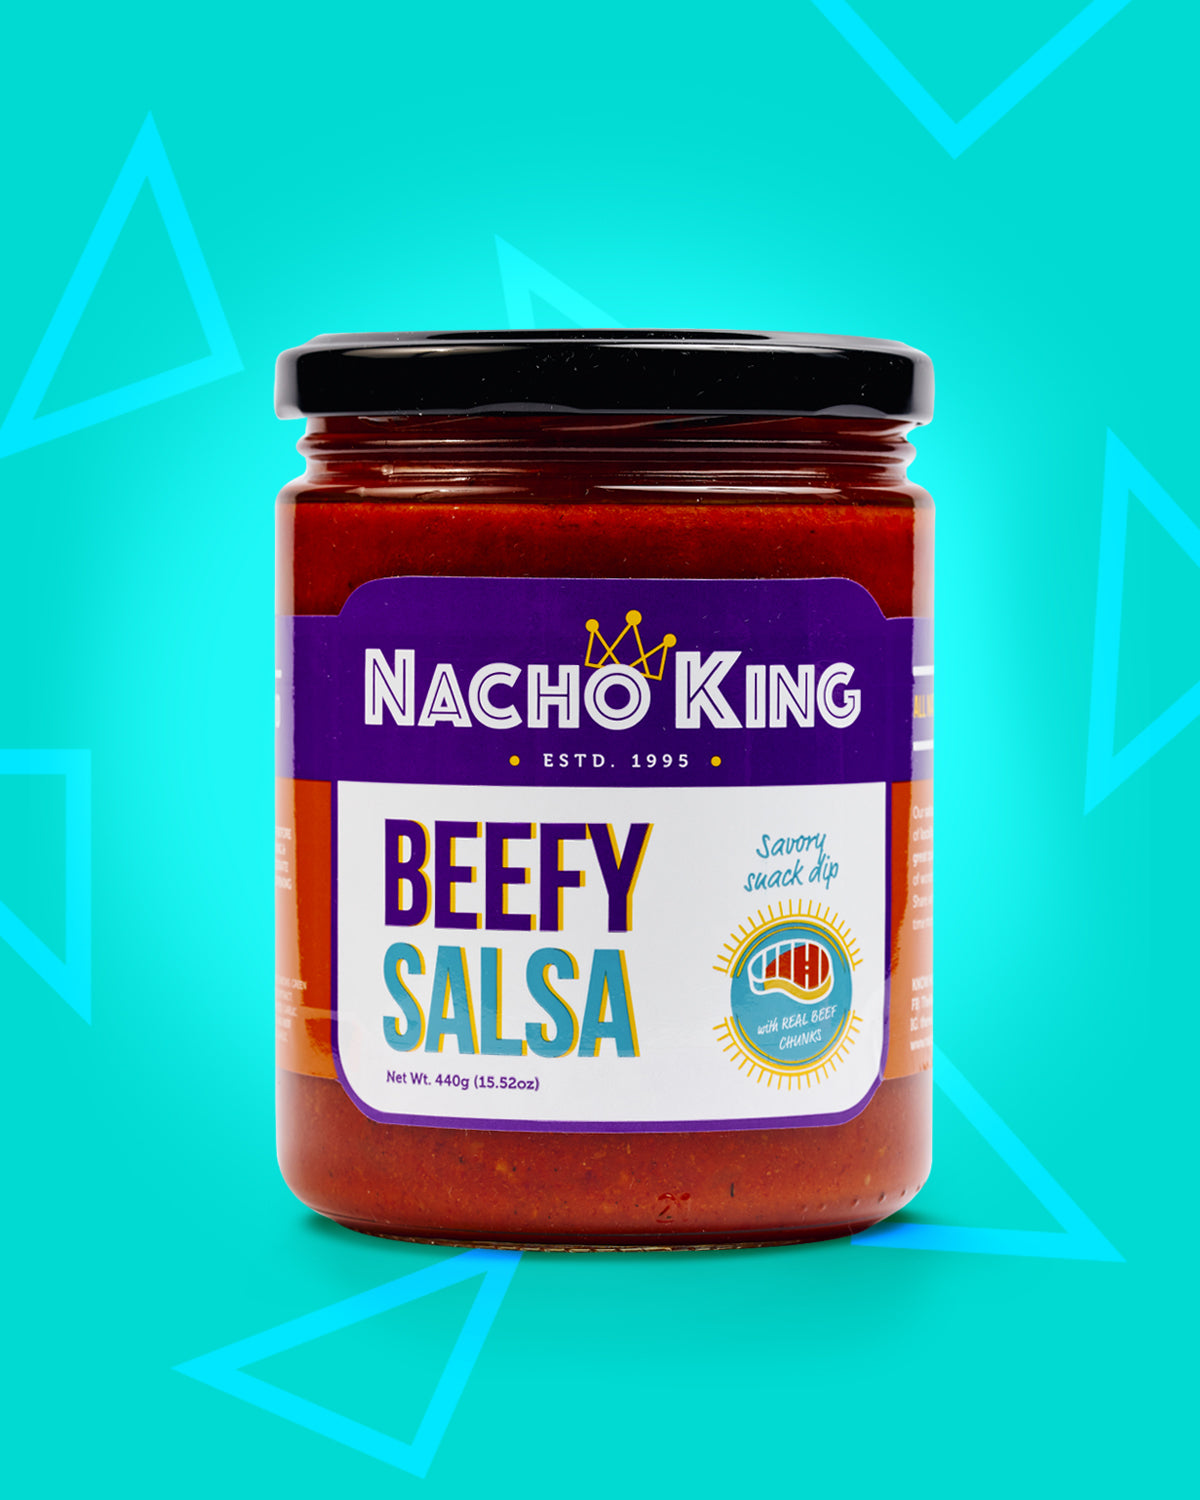 A jar of Nacho King Beefy Salsa Dip for Nachos, Tortillas, and Chips